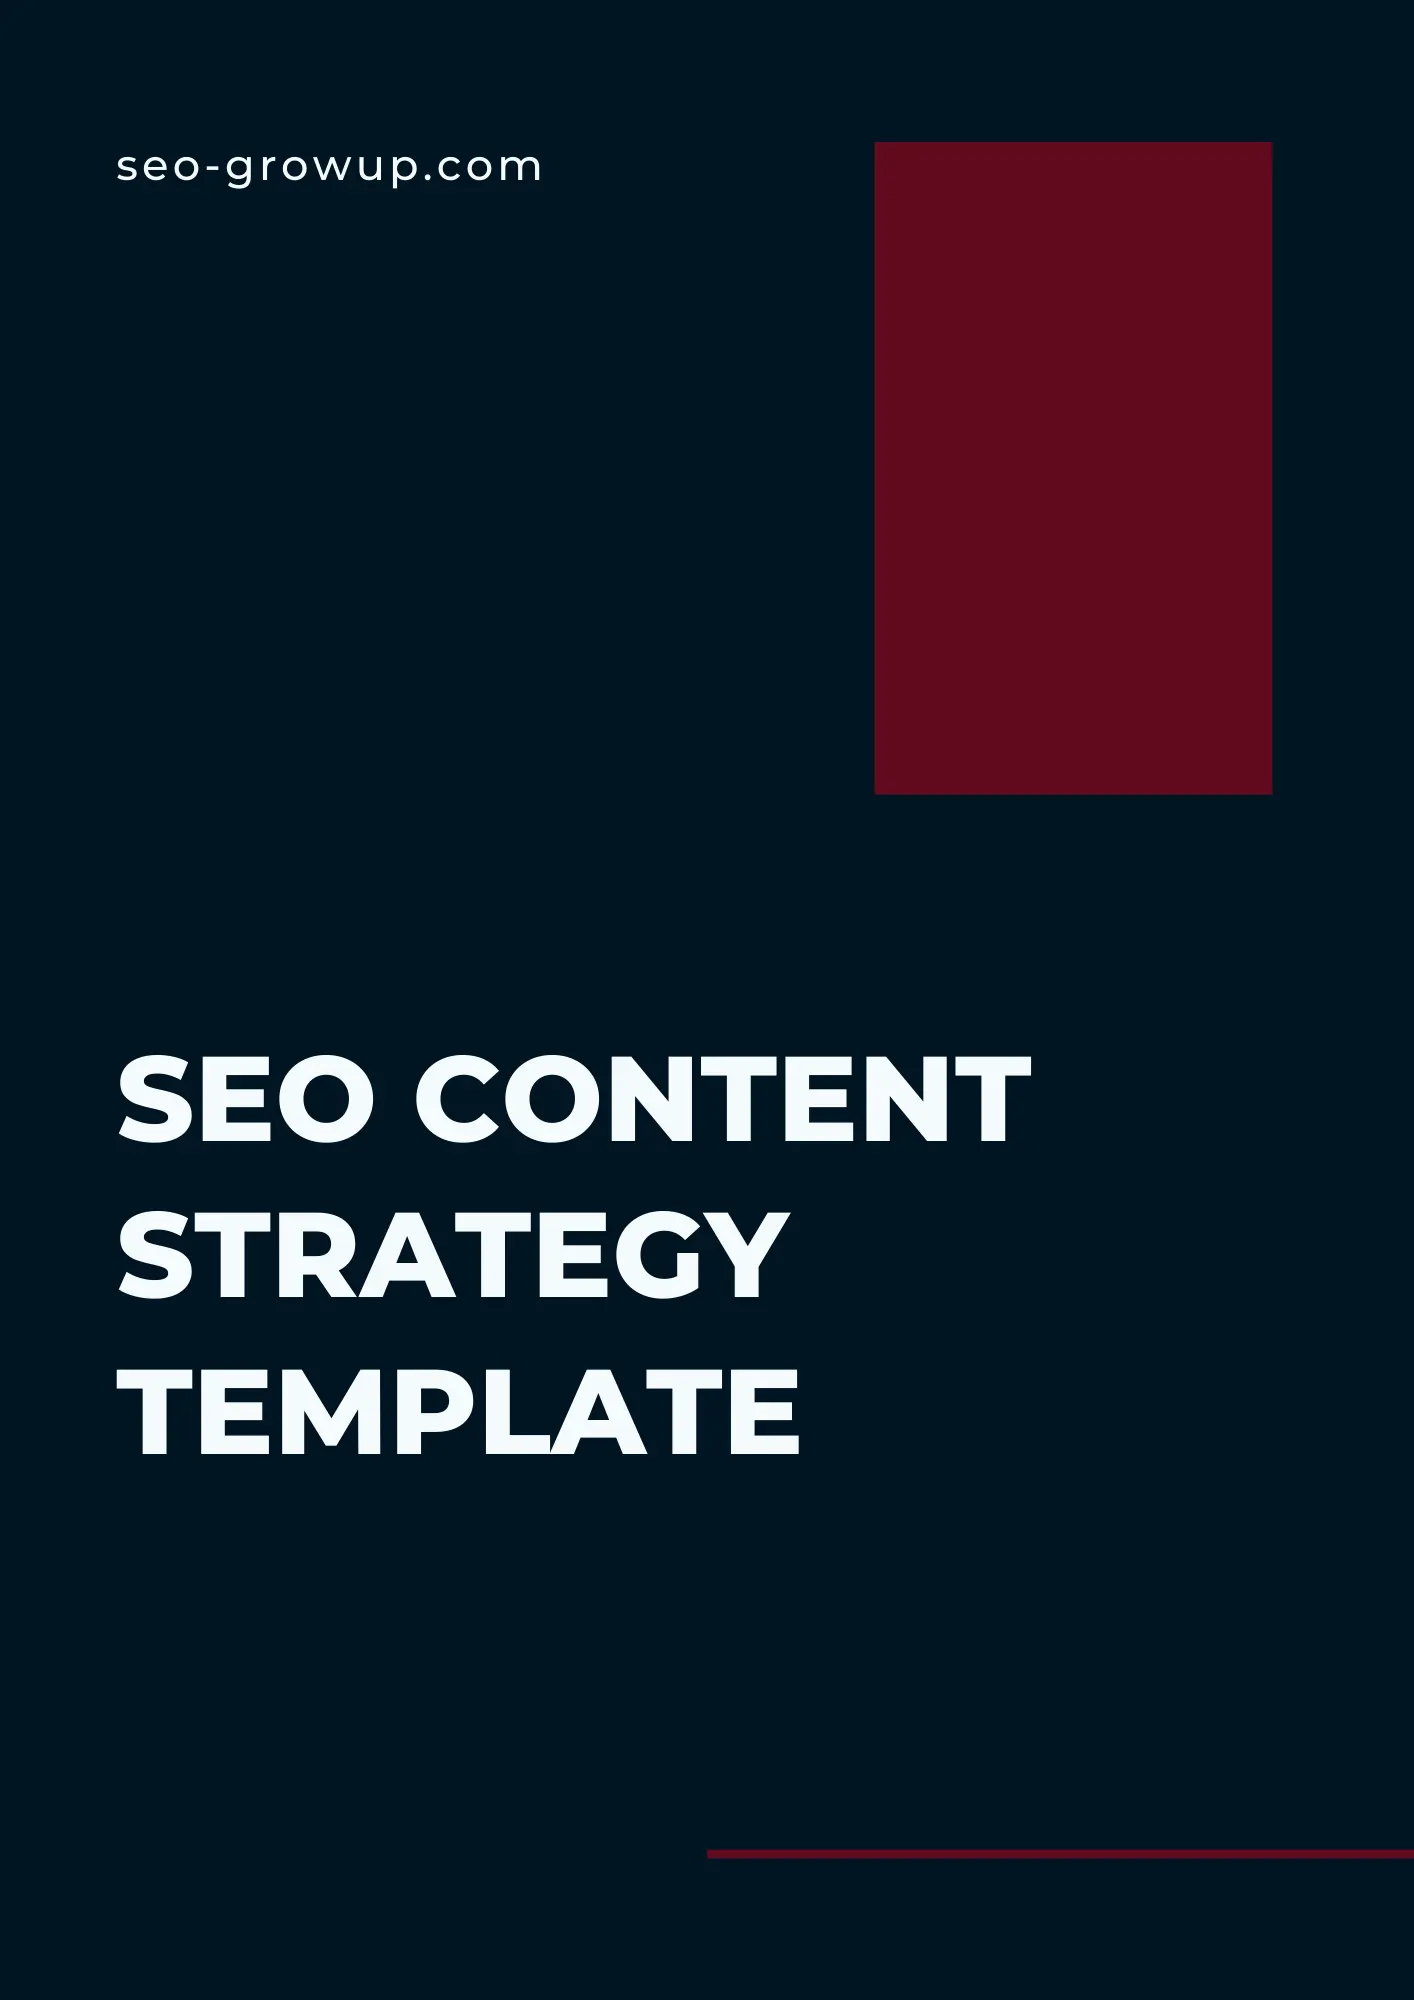 SEO Content Strategy Template